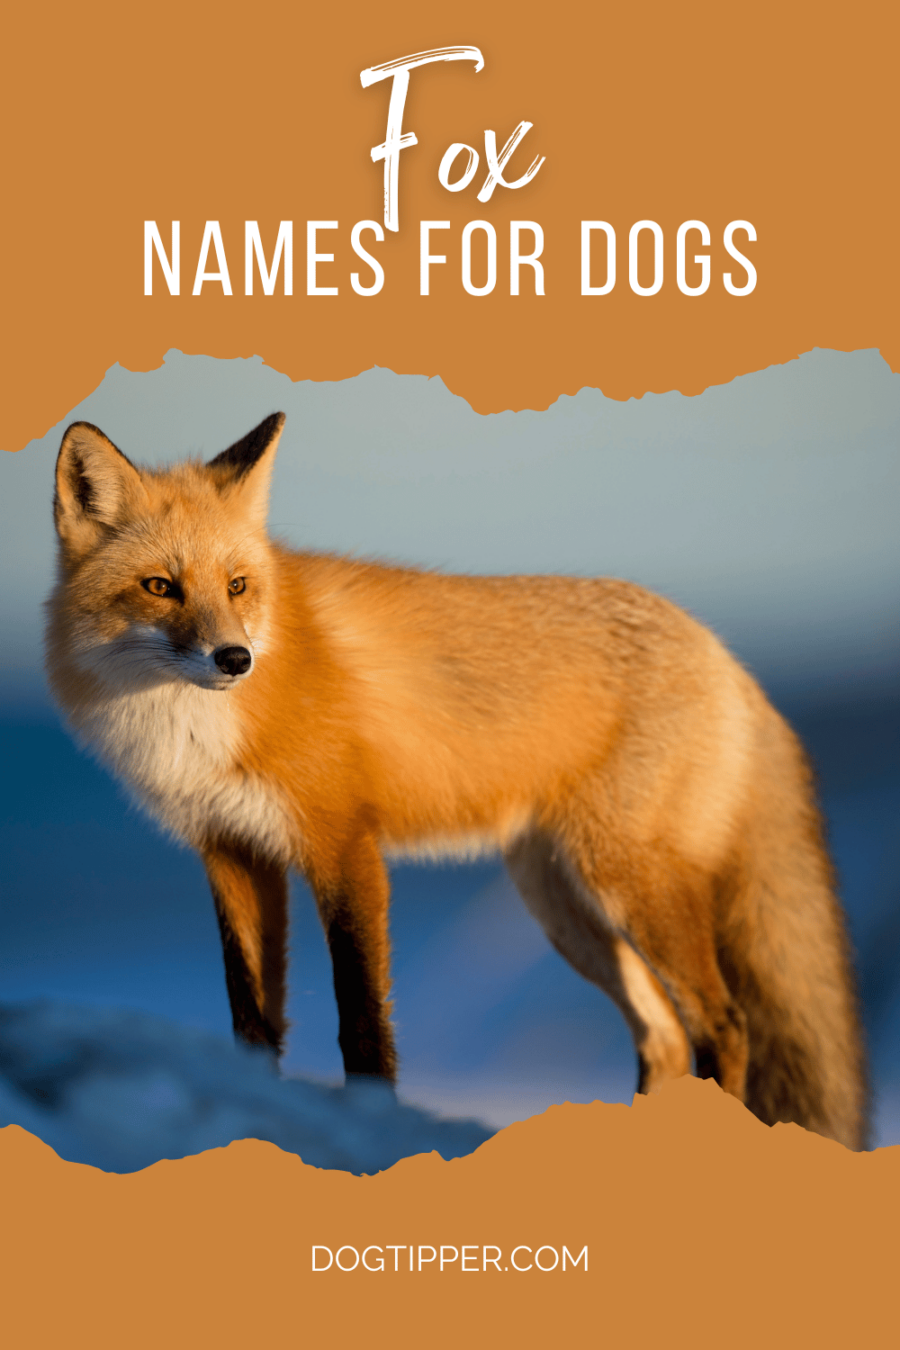 Image of fox on Pinterest pin about Fox names for dogs